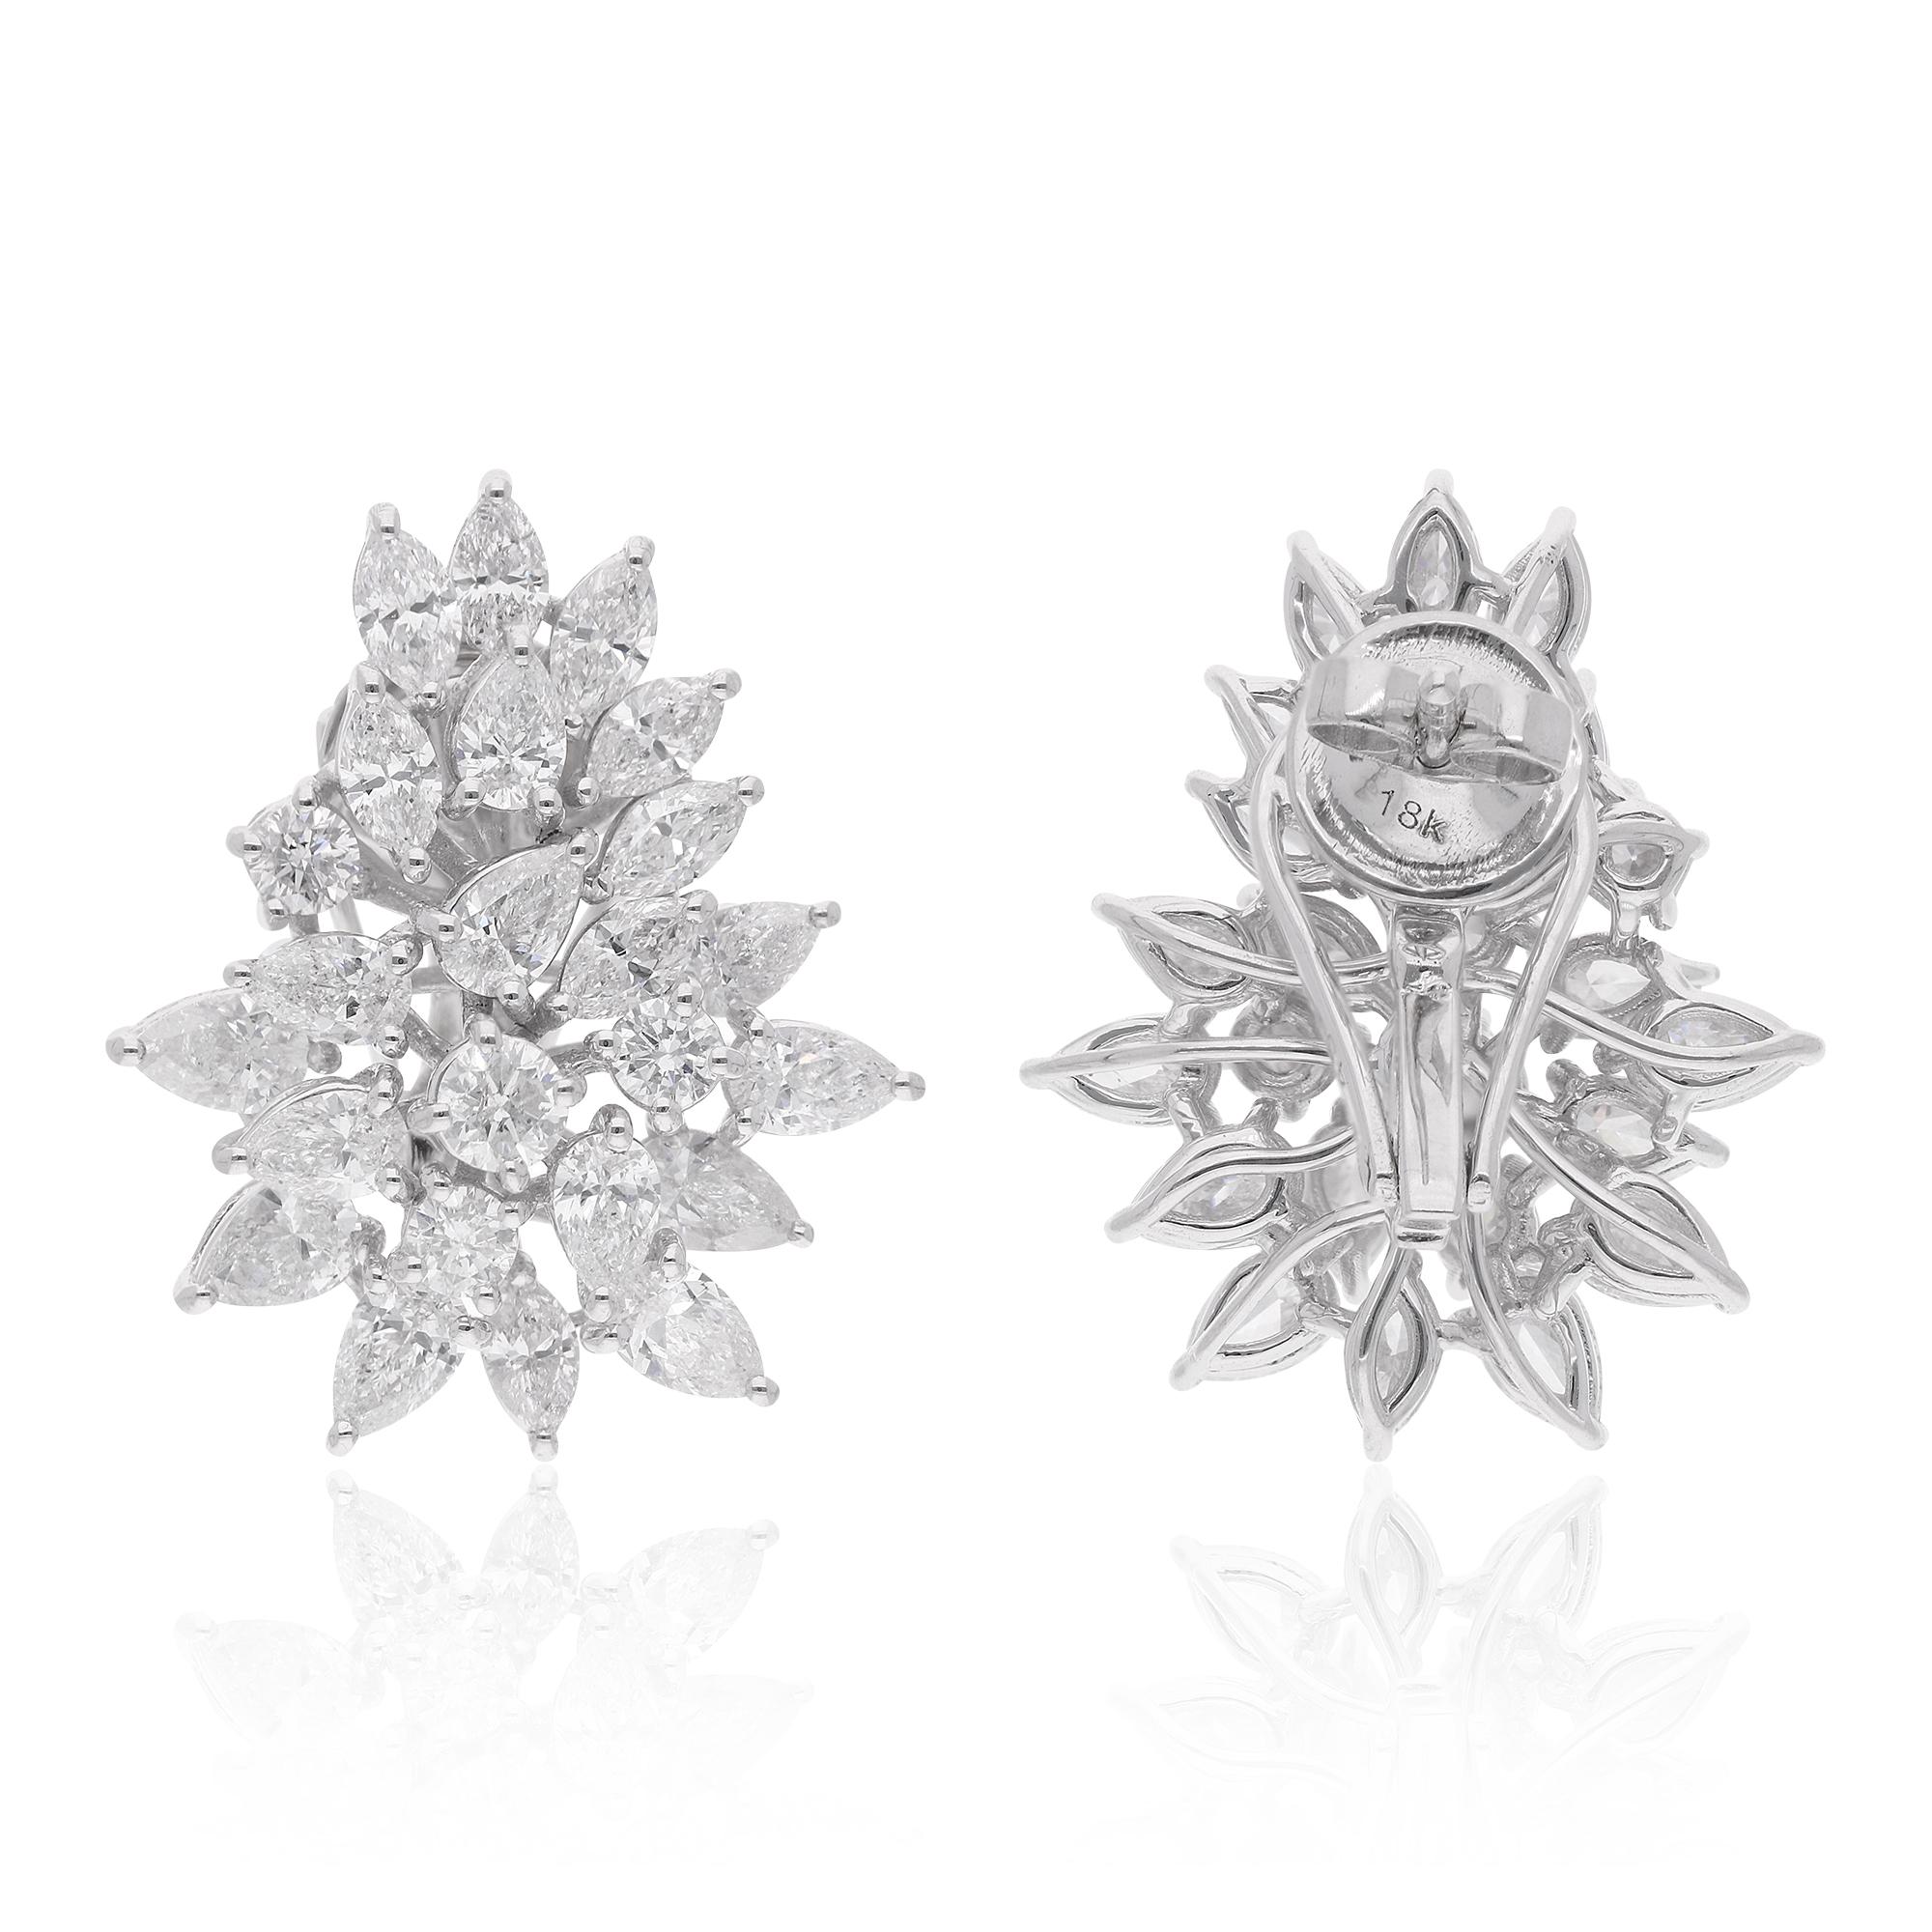 Crafted with precision and attention to detail, these earrings are designed to make a statement while remaining comfortable and secure to wear. The lustrous 14 karat white gold setting provides the perfect backdrop for the dazzling diamonds,